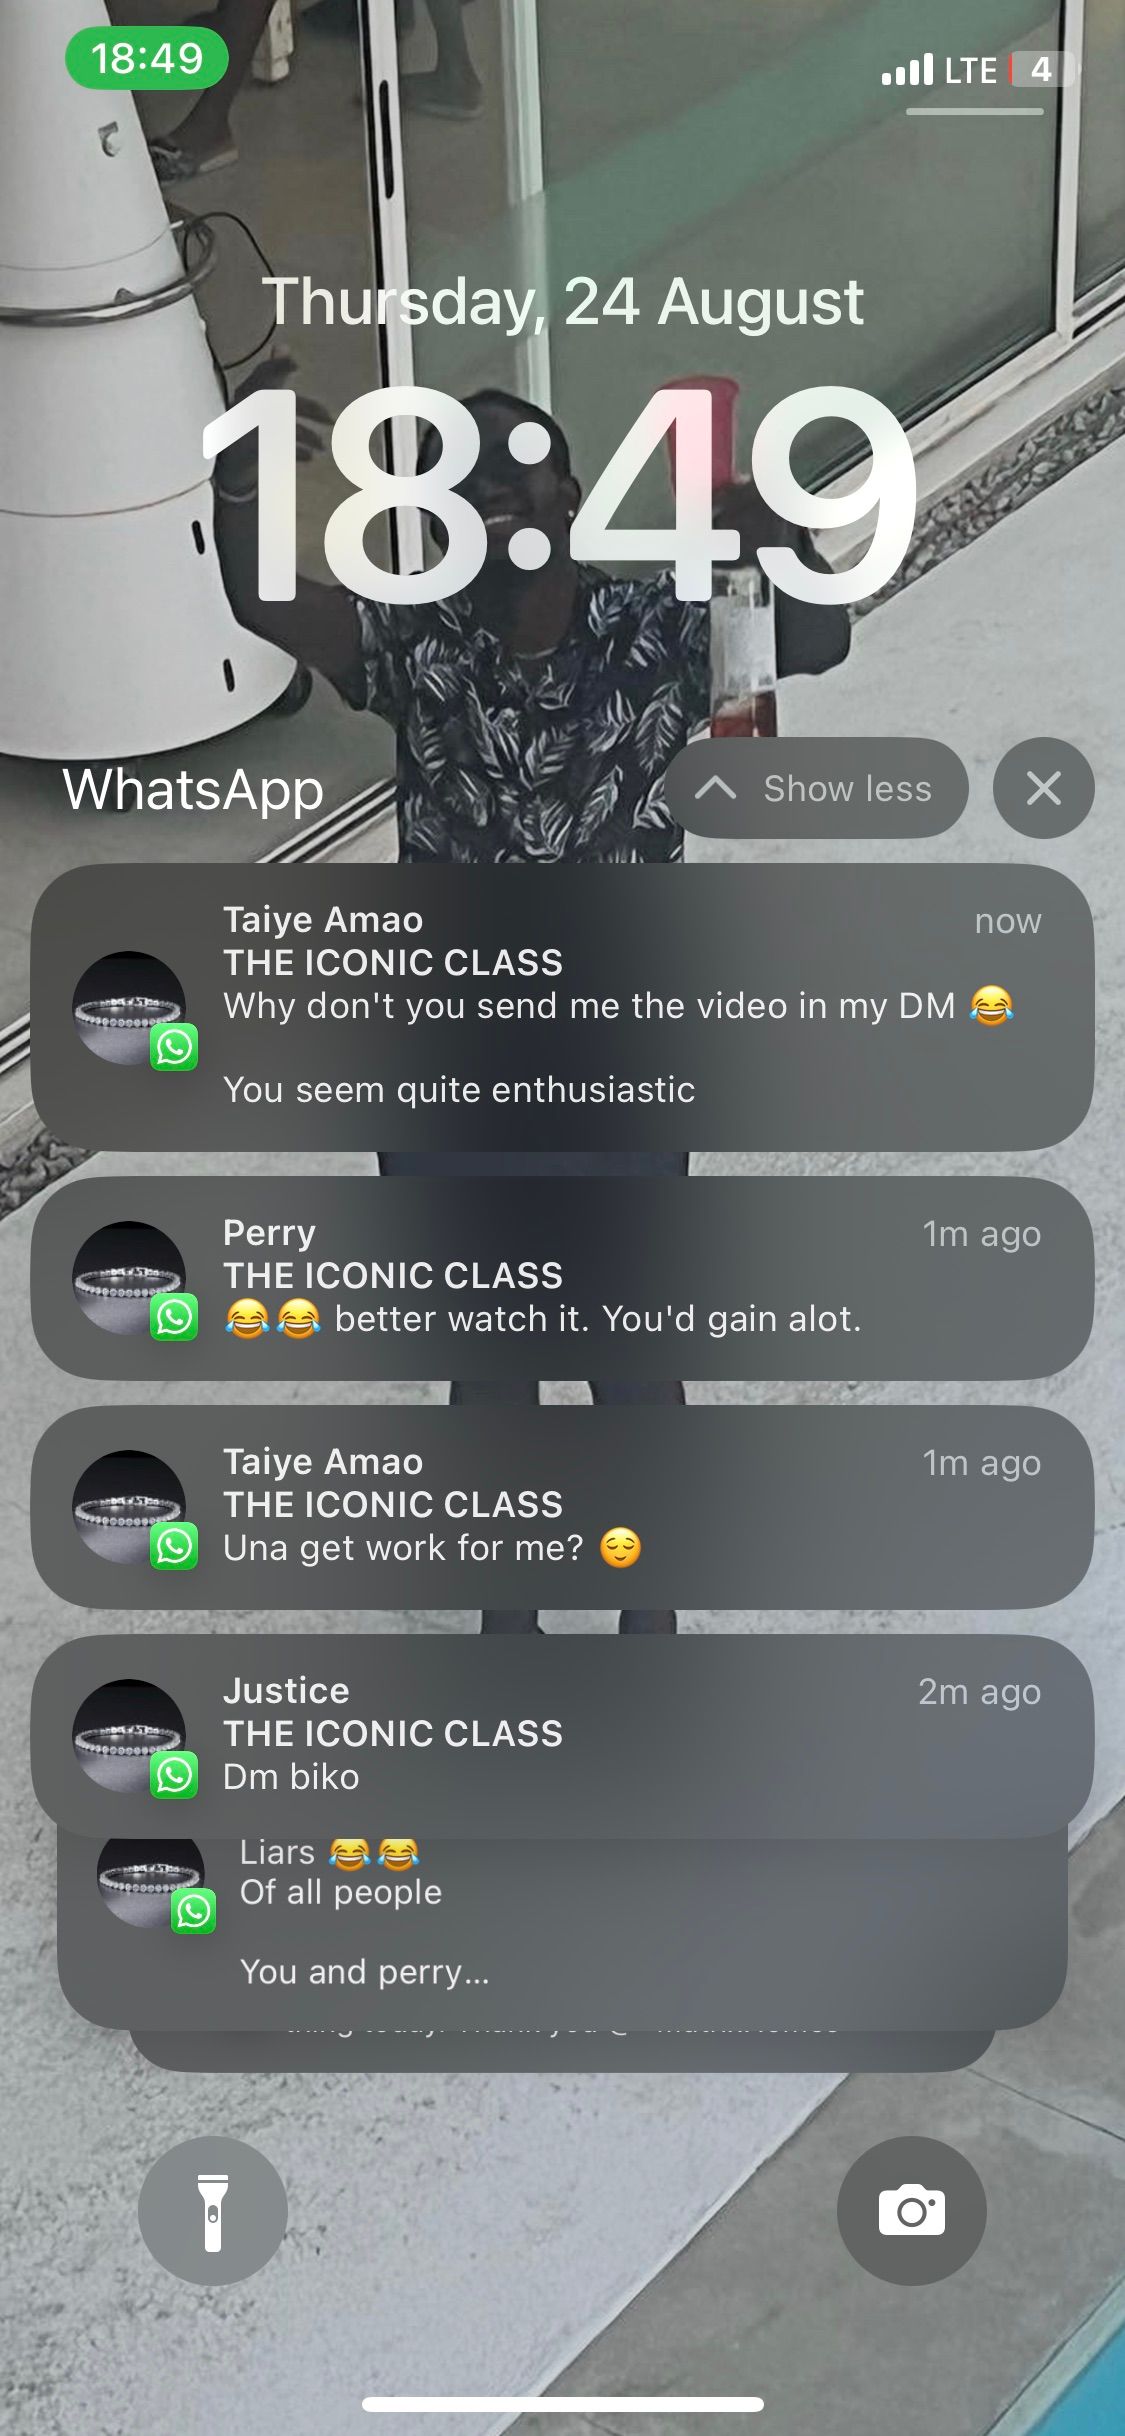 WhatsApp Notification Preview Messages